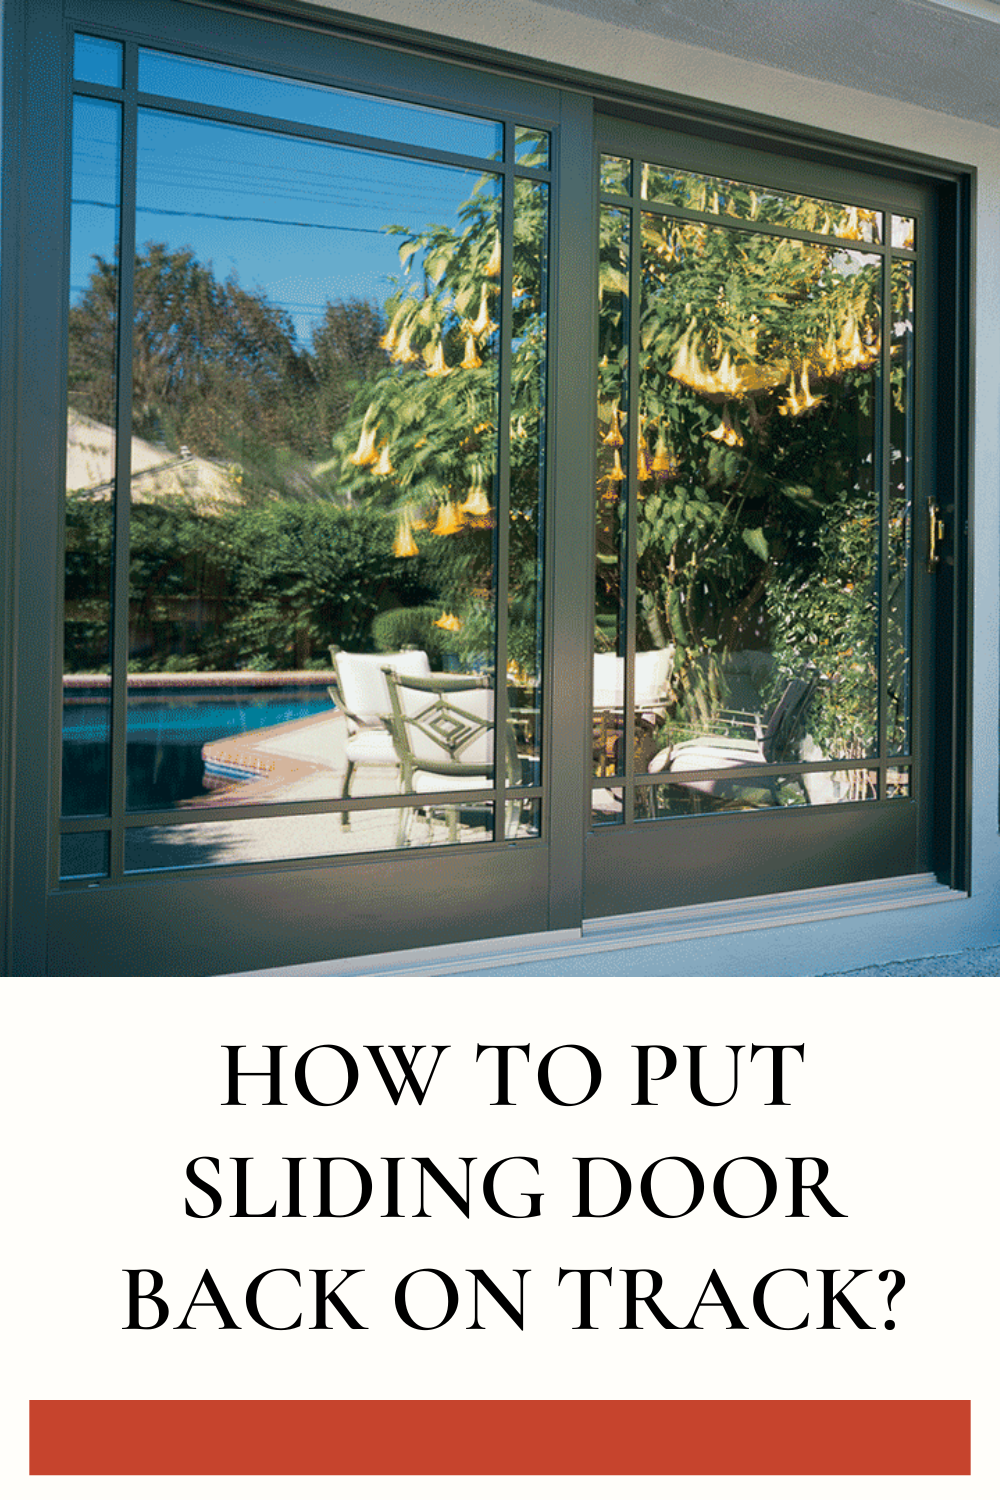 How to Put Sliding Door Back on Track